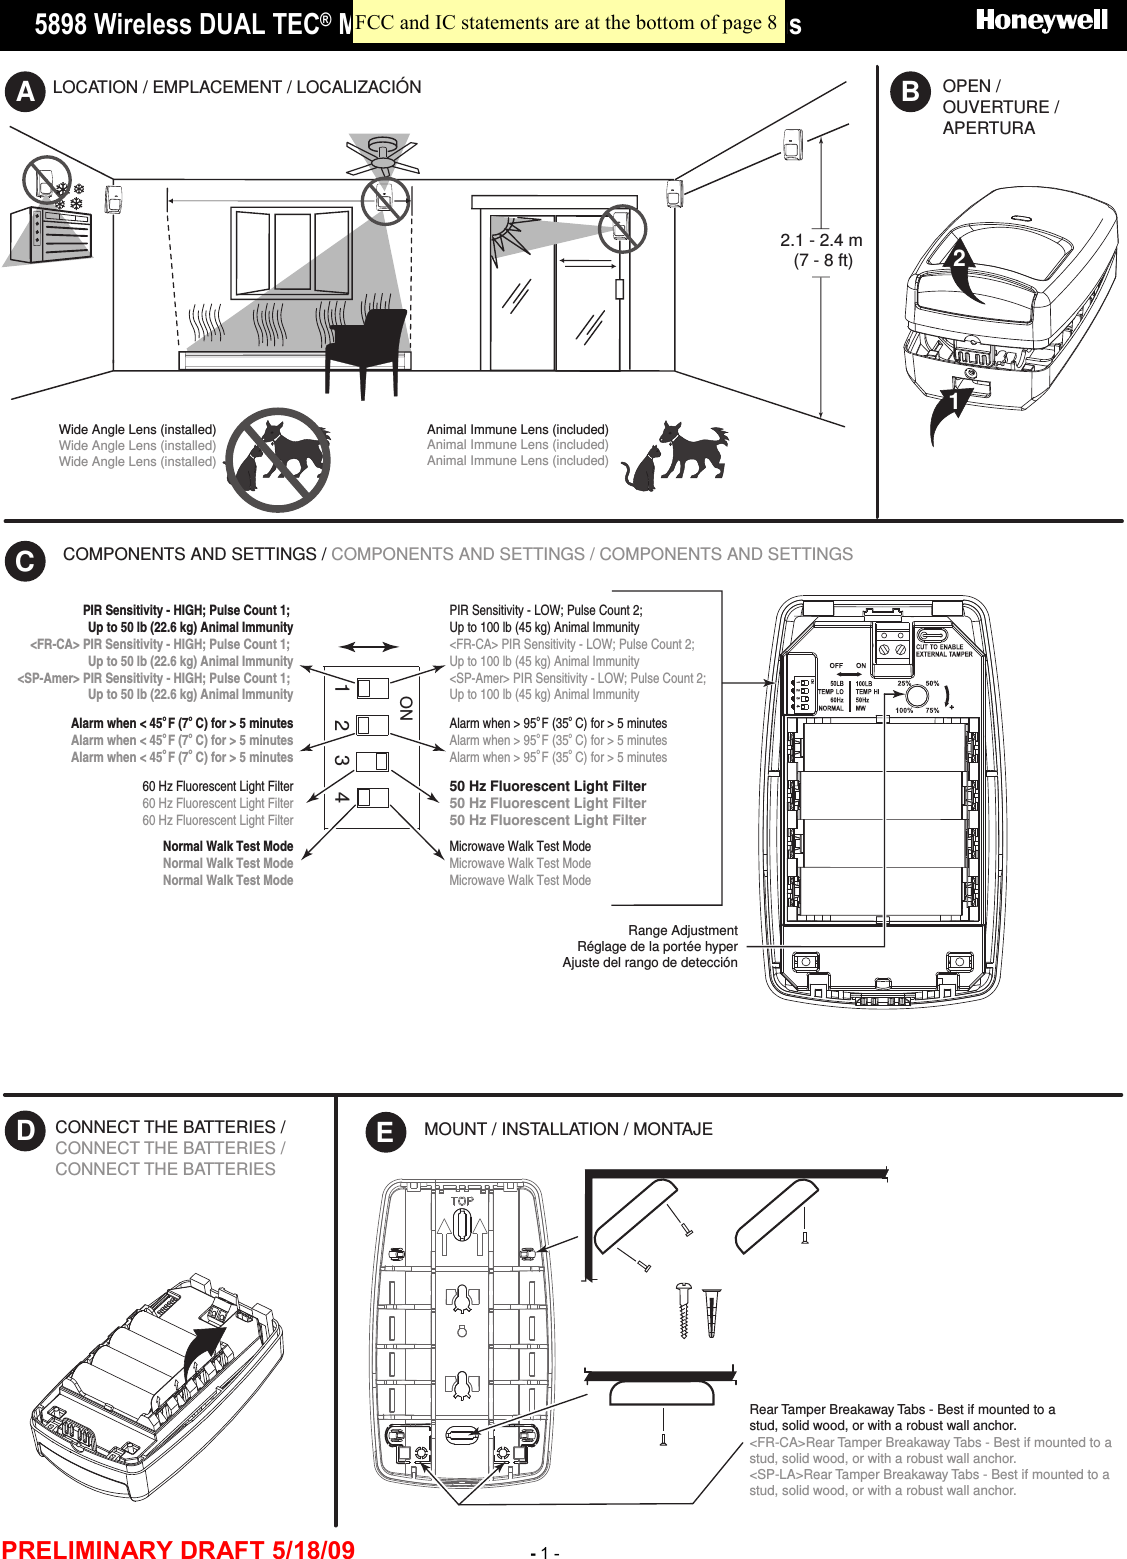      5898 Wireless DUAL TEC® Motion Sensor  - Installation Instructions    PRELIMINARY DRAFT 5/18/09 - 1 - OPEN / OUVERTURE / APERTURALOCATION / EMPLACEMENT / LOCALIZACIÓN2.1 - 2.4 m(7 - 8 ft)ABWide Angle Lens (installed)Wide Angle Lens (installed)Wide Angle Lens (installed)Animal Immune Lens (included)Animal Immune Lens (included)Animal Immune Lens (included)21COMPONENTS AND SETTINGS / COMPONENTS AND SETTINGS / COMPONENTS AND SETTINGS CRange AdjustmentRéglage de la portée hyperAjuste del rango de detecciónECONNECT THE BATTERIES / CONNECT THE BATTERIES / CONNECT THE BATTERIES DMOUNT / INSTALLATION / MONTAJE Rear Tamper Breakaway Tabs - Best if mounted to a stud, solid wood, or with a robust wall anchor.&lt;FR-CA&gt;Rear Tamper Breakaway Tabs - Best if mounted to a stud, solid wood, or with a robust wall anchor.&lt;SP-LA&gt;Rear Tamper Breakaway Tabs - Best if mounted to a stud, solid wood, or with a robust wall anchor.ON2 3 41ON23 41PIR Sensitivity - LOW; Pulse Count 2; Up to 100 lb (45 kg) Animal Immunity&lt;FR-CA&gt; PIR Sensitivity - LOW; Pulse Count 2; Up to 100 lb (45 kg) Animal Immunity&lt;SP-Amer&gt; PIR Sensitivity - LOW; Pulse Count 2; Up to 100 lb (45 kg) Animal ImmunityPIR Sensitivity - HIGH; Pulse Count 1; Up to 50 lb (22.6 kg) Animal Immunity&lt;FR-CA&gt; PIR Sensitivity - HIGH; Pulse Count 1; Up to 50 lb (22.6 kg) Animal Immunity&lt;SP-Amer&gt; PIR Sensitivity - HIGH; Pulse Count 1; Up to 50 lb (22.6 kg) Animal Immunity60 Hz Fluorescent Light Filter60 Hz Fluorescent Light Filter60 Hz Fluorescent Light Filter50 Hz Fluorescent Light Filter50 Hz Fluorescent Light Filter50 Hz Fluorescent Light FilterAlarm when &lt; 45o F (7o C) for &gt; 5 minutesAlarm when &lt; 45o F (7o C) for &gt; 5 minutesAlarm when &lt; 45o F (7o C) for &gt; 5 minutesAlarm when &gt; 95o F (35o C) for &gt; 5 minutesAlarm when &gt; 95o F (35o C) for &gt; 5 minutesAlarm when &gt; 95o F (35o C) for &gt; 5 minutesMicrowave Walk Test ModeMicrowave Walk Test ModeMicrowave Walk Test ModeNormal Walk Test ModeNormal Walk Test ModeNormal Walk Test Mode FCC and IC statements are at the bottom of page 8